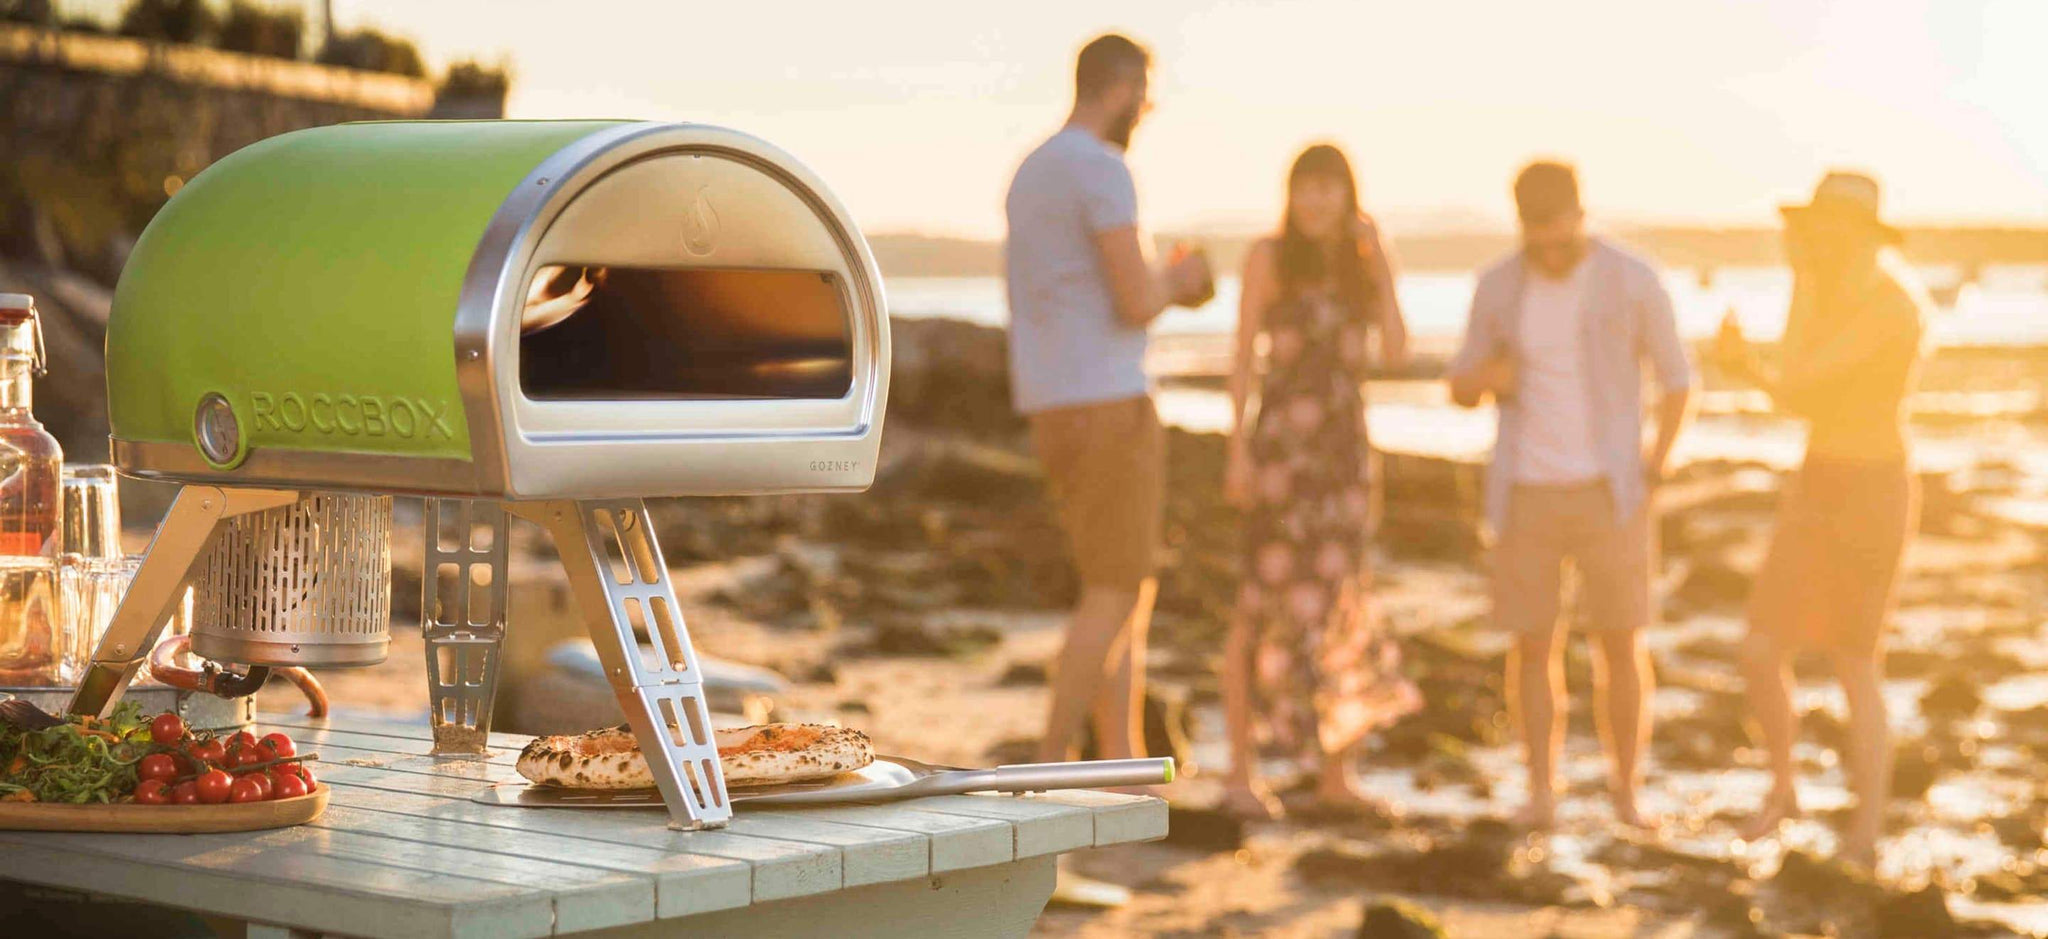 Portable pizza oven on the beach